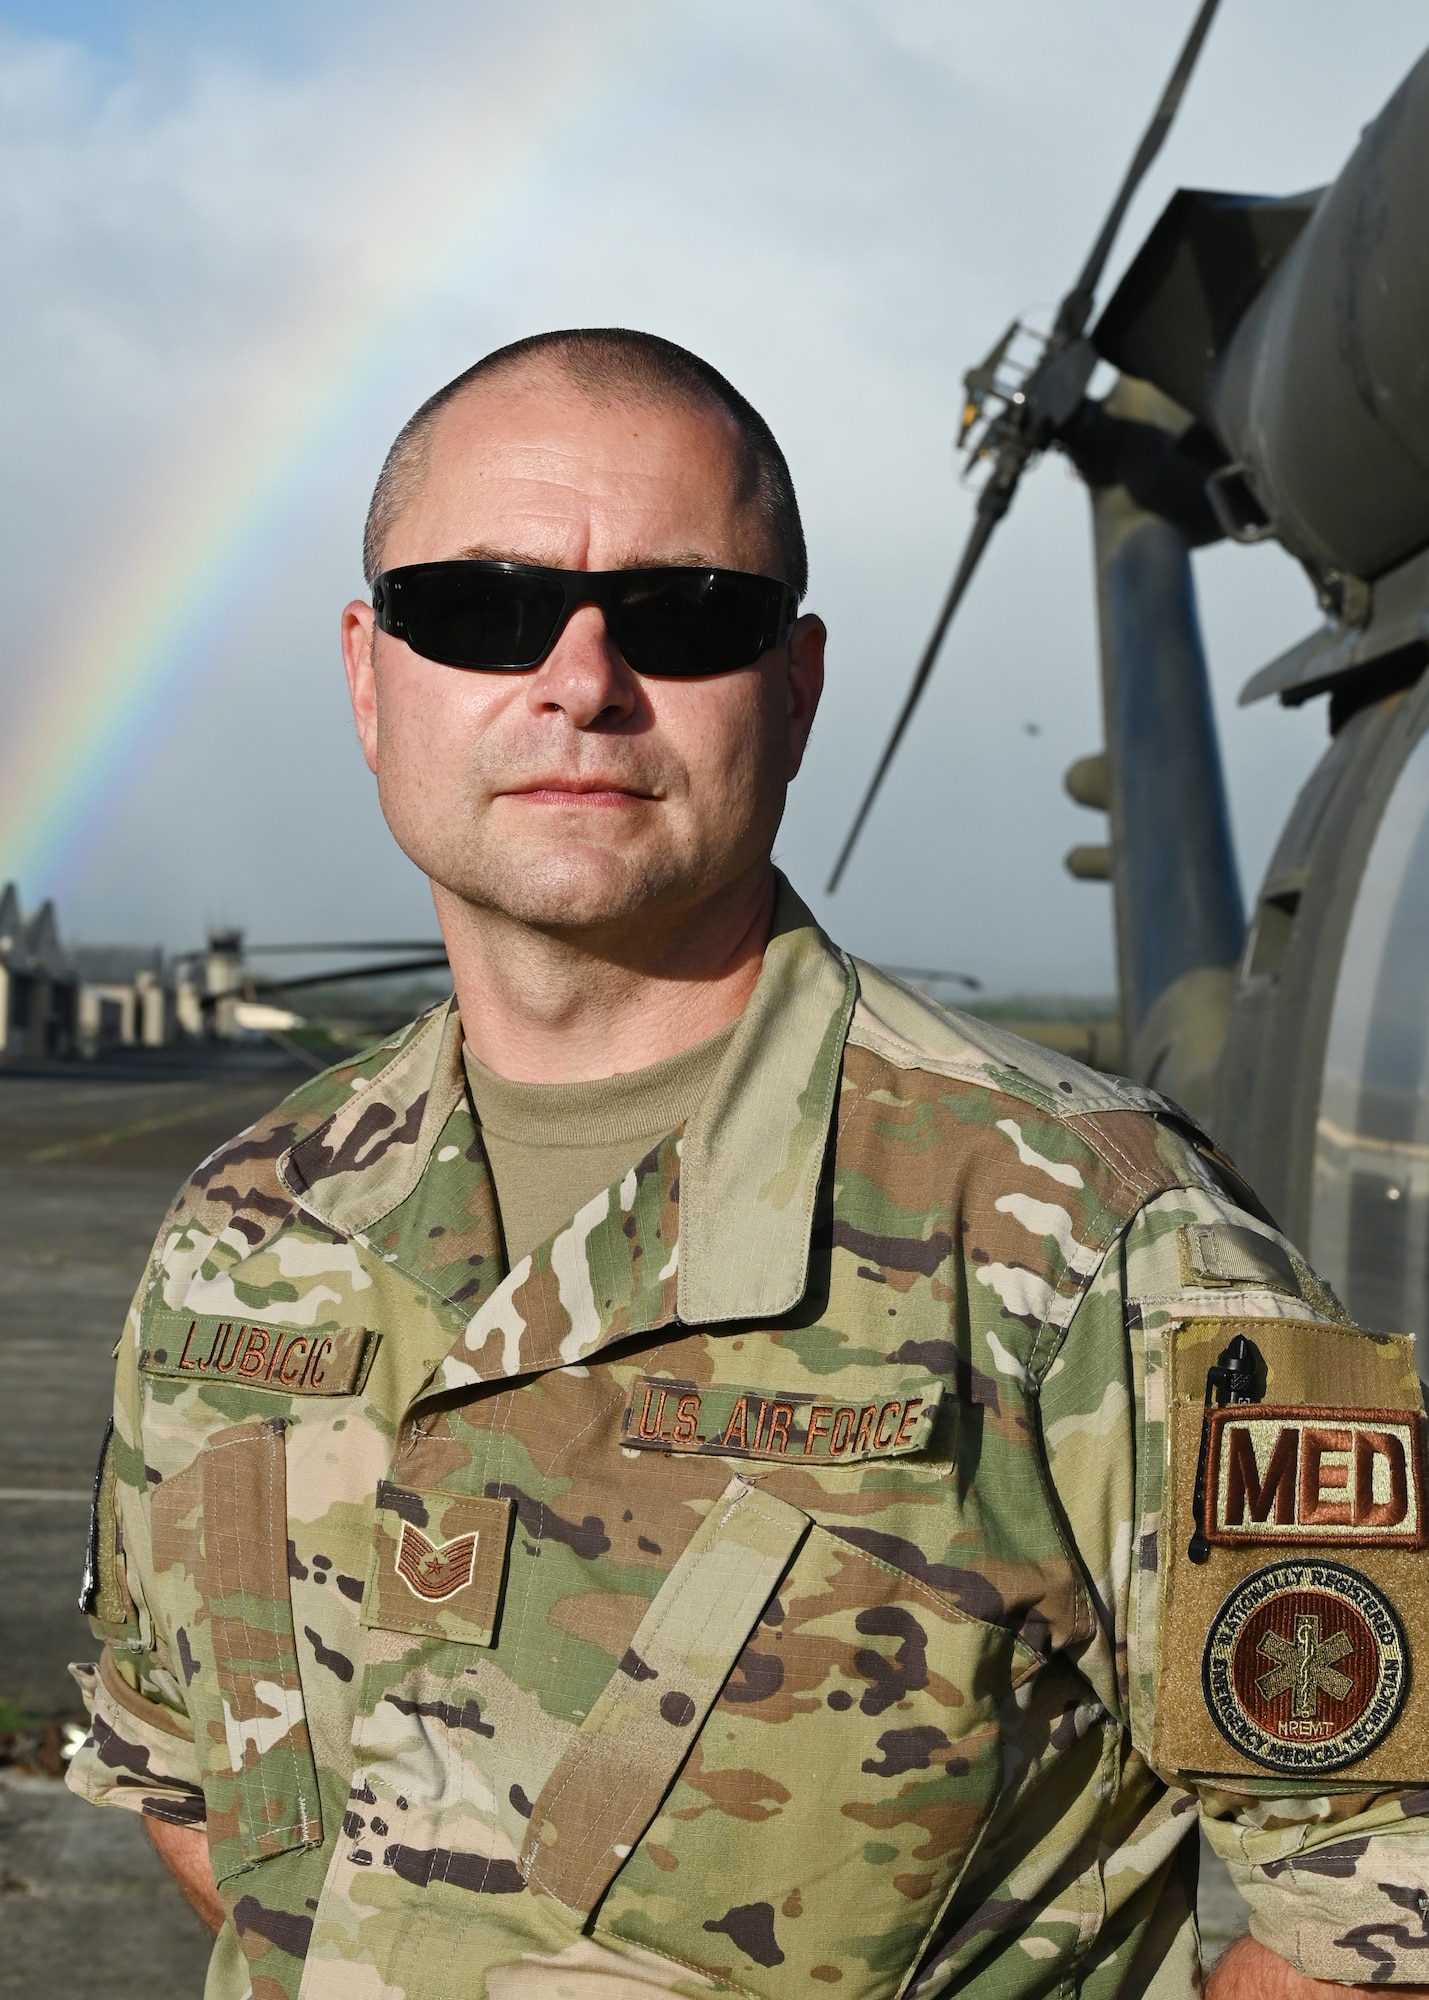 Tech. Sgt. Paul Ljubicic, 104th Medical Group aerospace medical technician, stands in front of an Army UH-60 Black Hawk helicopter after a morale flight at Wheeler Army Airfield, Hawaii, May 3, 2022. Ljubicic planned the morale flight for the Airmen after completing training requirements at Tripler Army Medical Center. (U.S. Air National Guard Photo by Senior Airman Camille Lienau)